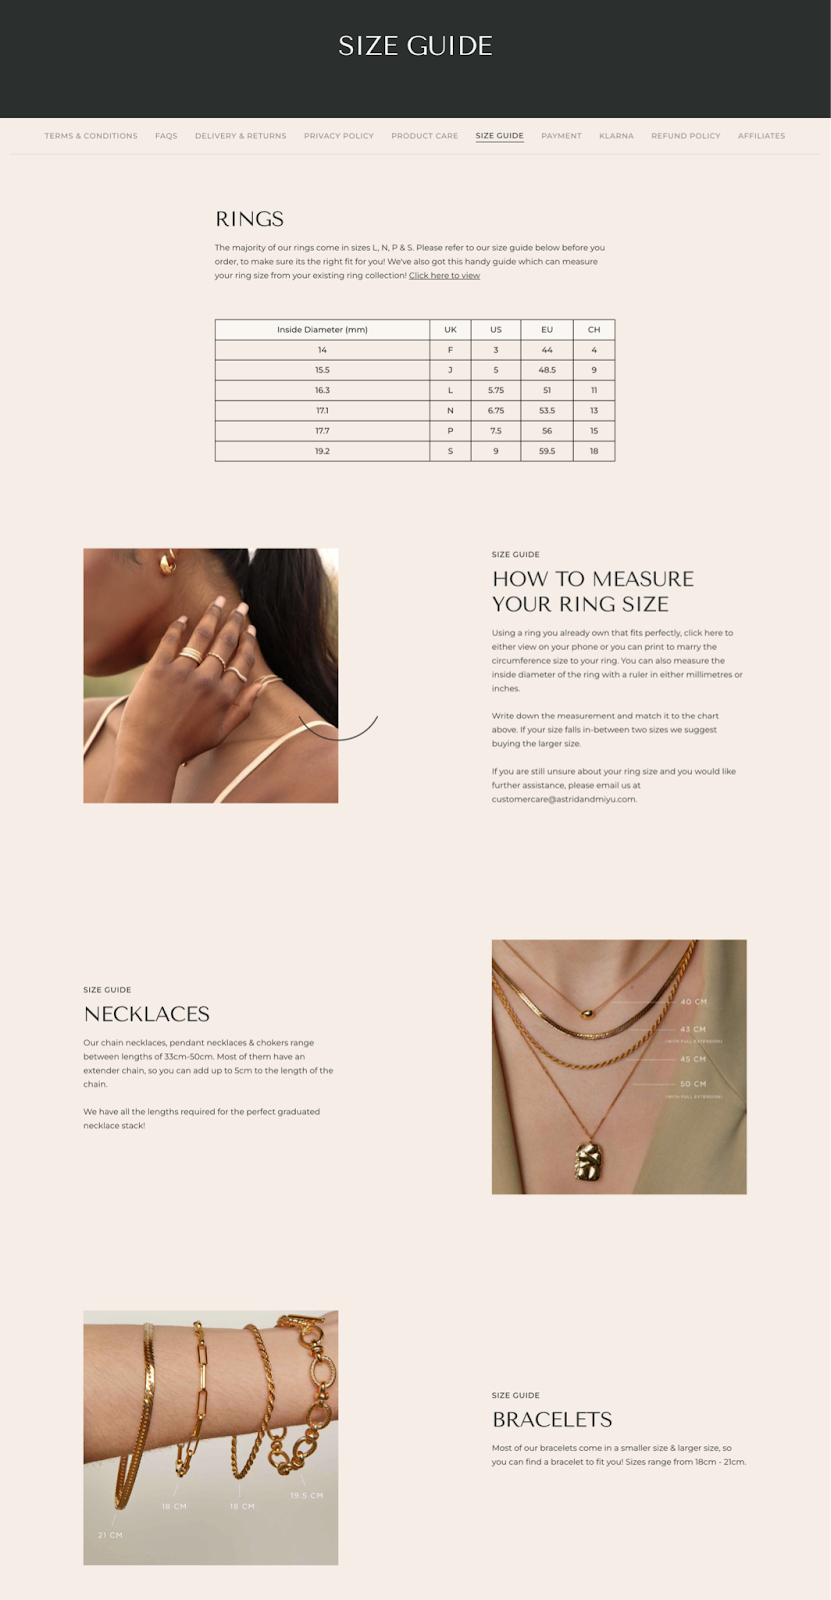 Screenshot of Astrid & Miyu's full size guide on their jewellery store.